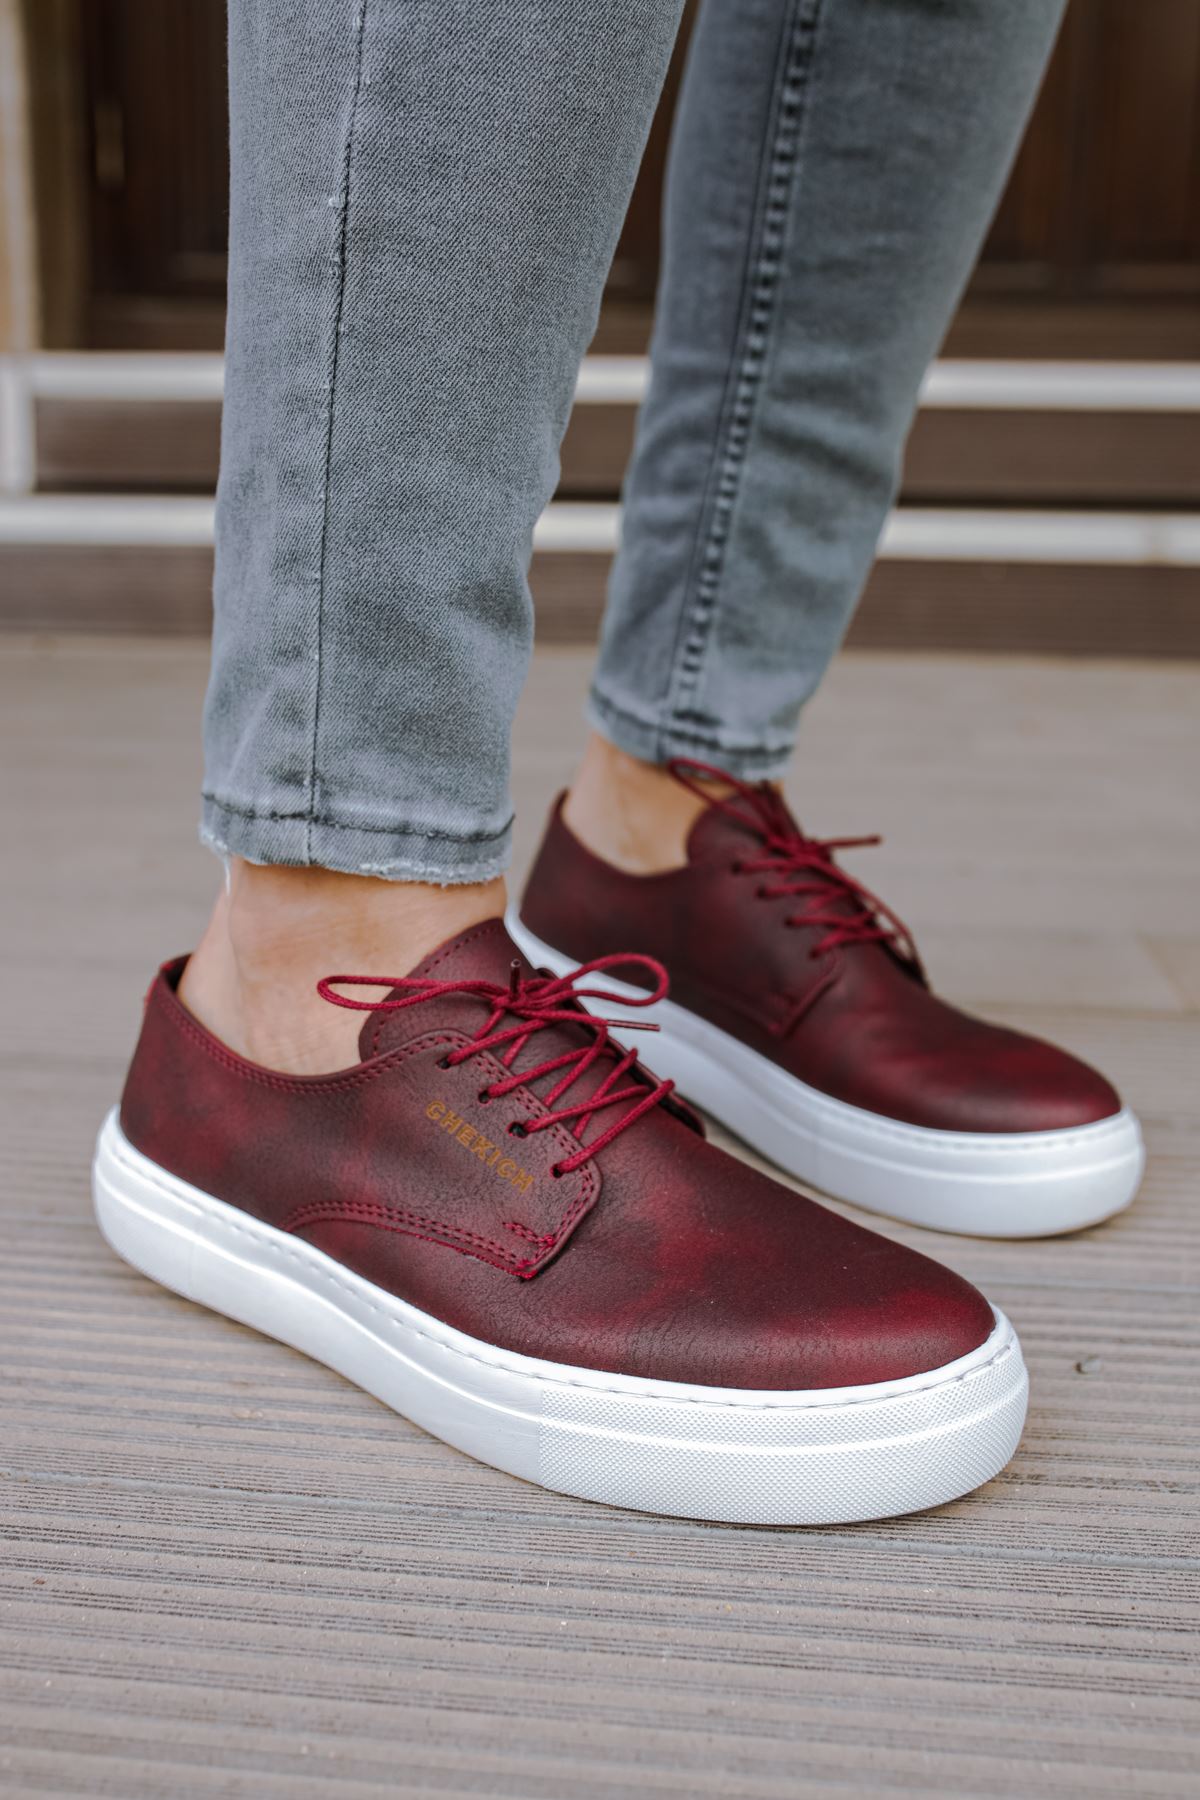 CH005 BT Men's Burgundy-White Sole Pneumatic Leather-Orthopedics Casual Sneaker Sports Shoes - STREETMODE ™